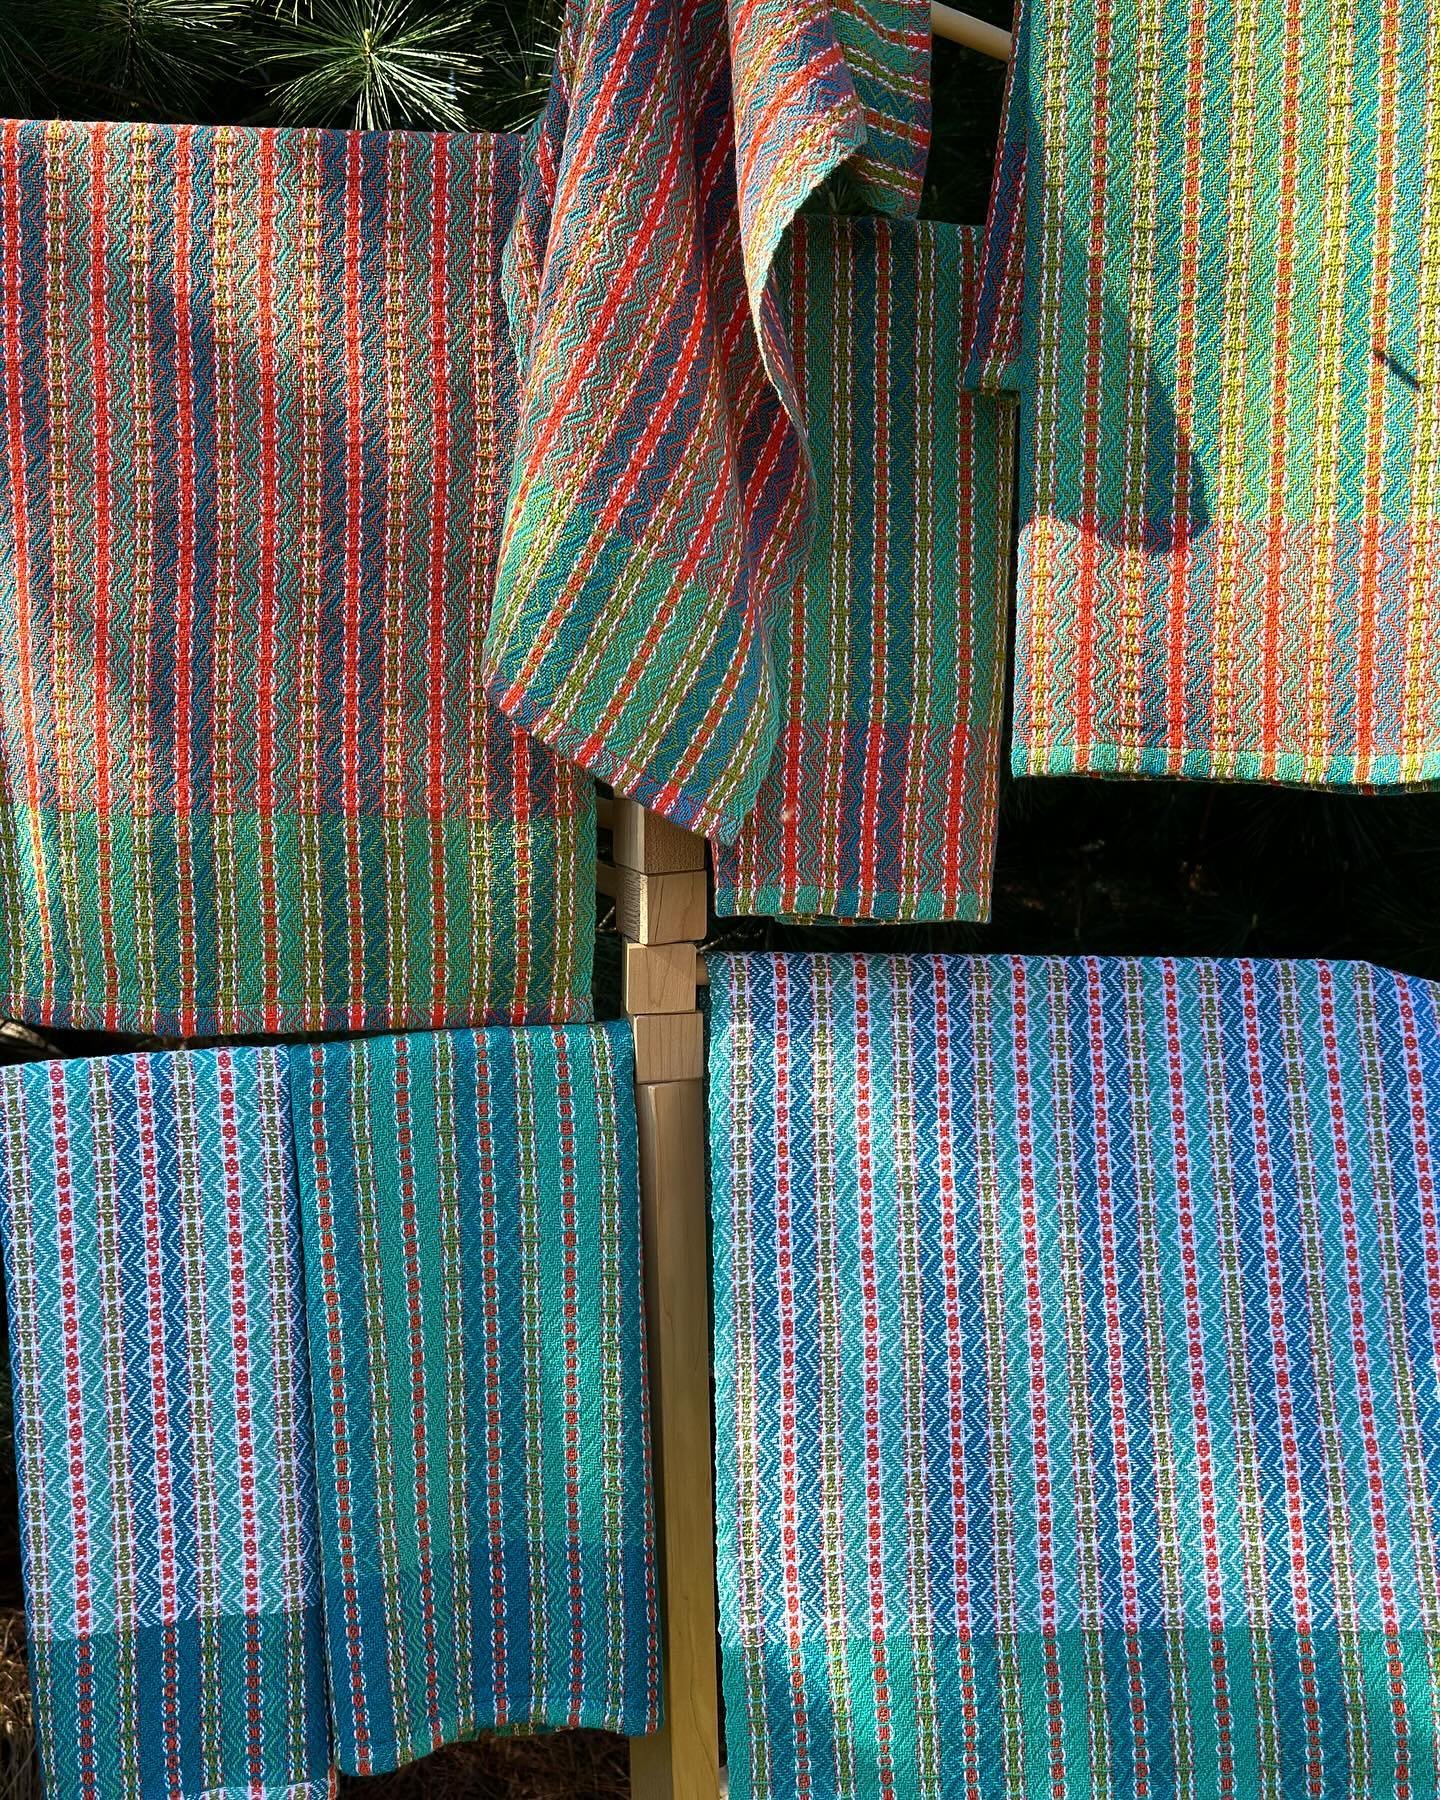 A batch of new towels have just hatched. I decided to revisit this design I first wove last year, using bright colors in the warp and using some of the same colors in each towel&rsquo;s weft  a little differently. It was fun to have all these colors 